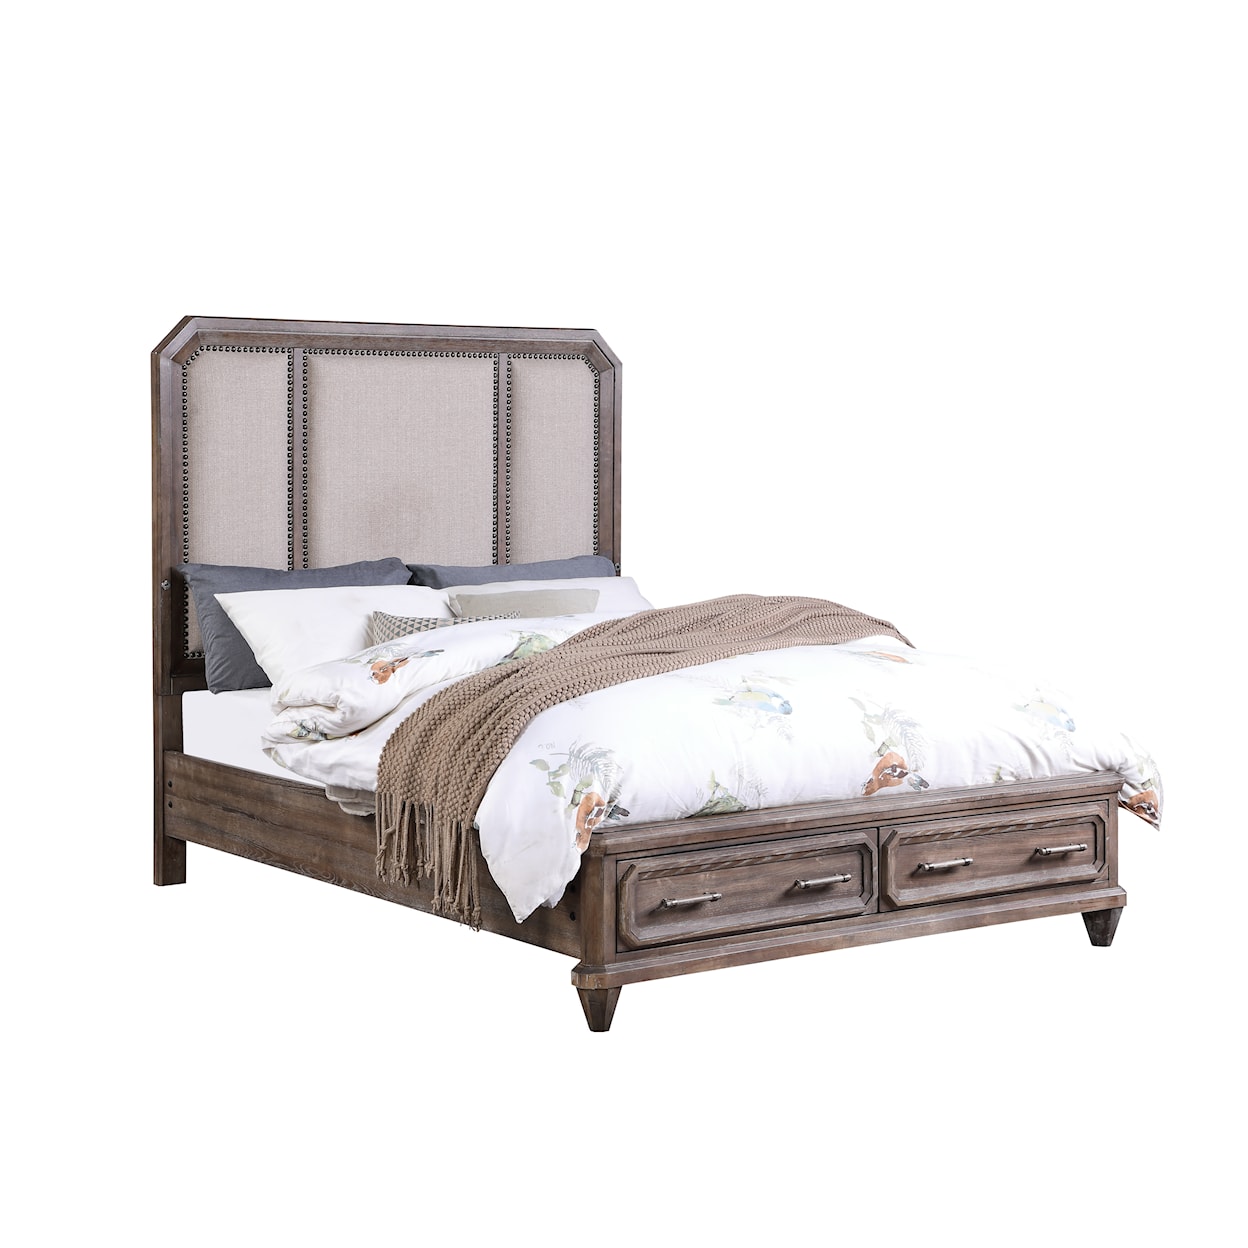 New Classic Furniture Lincoln Park Queen Storage Bed 